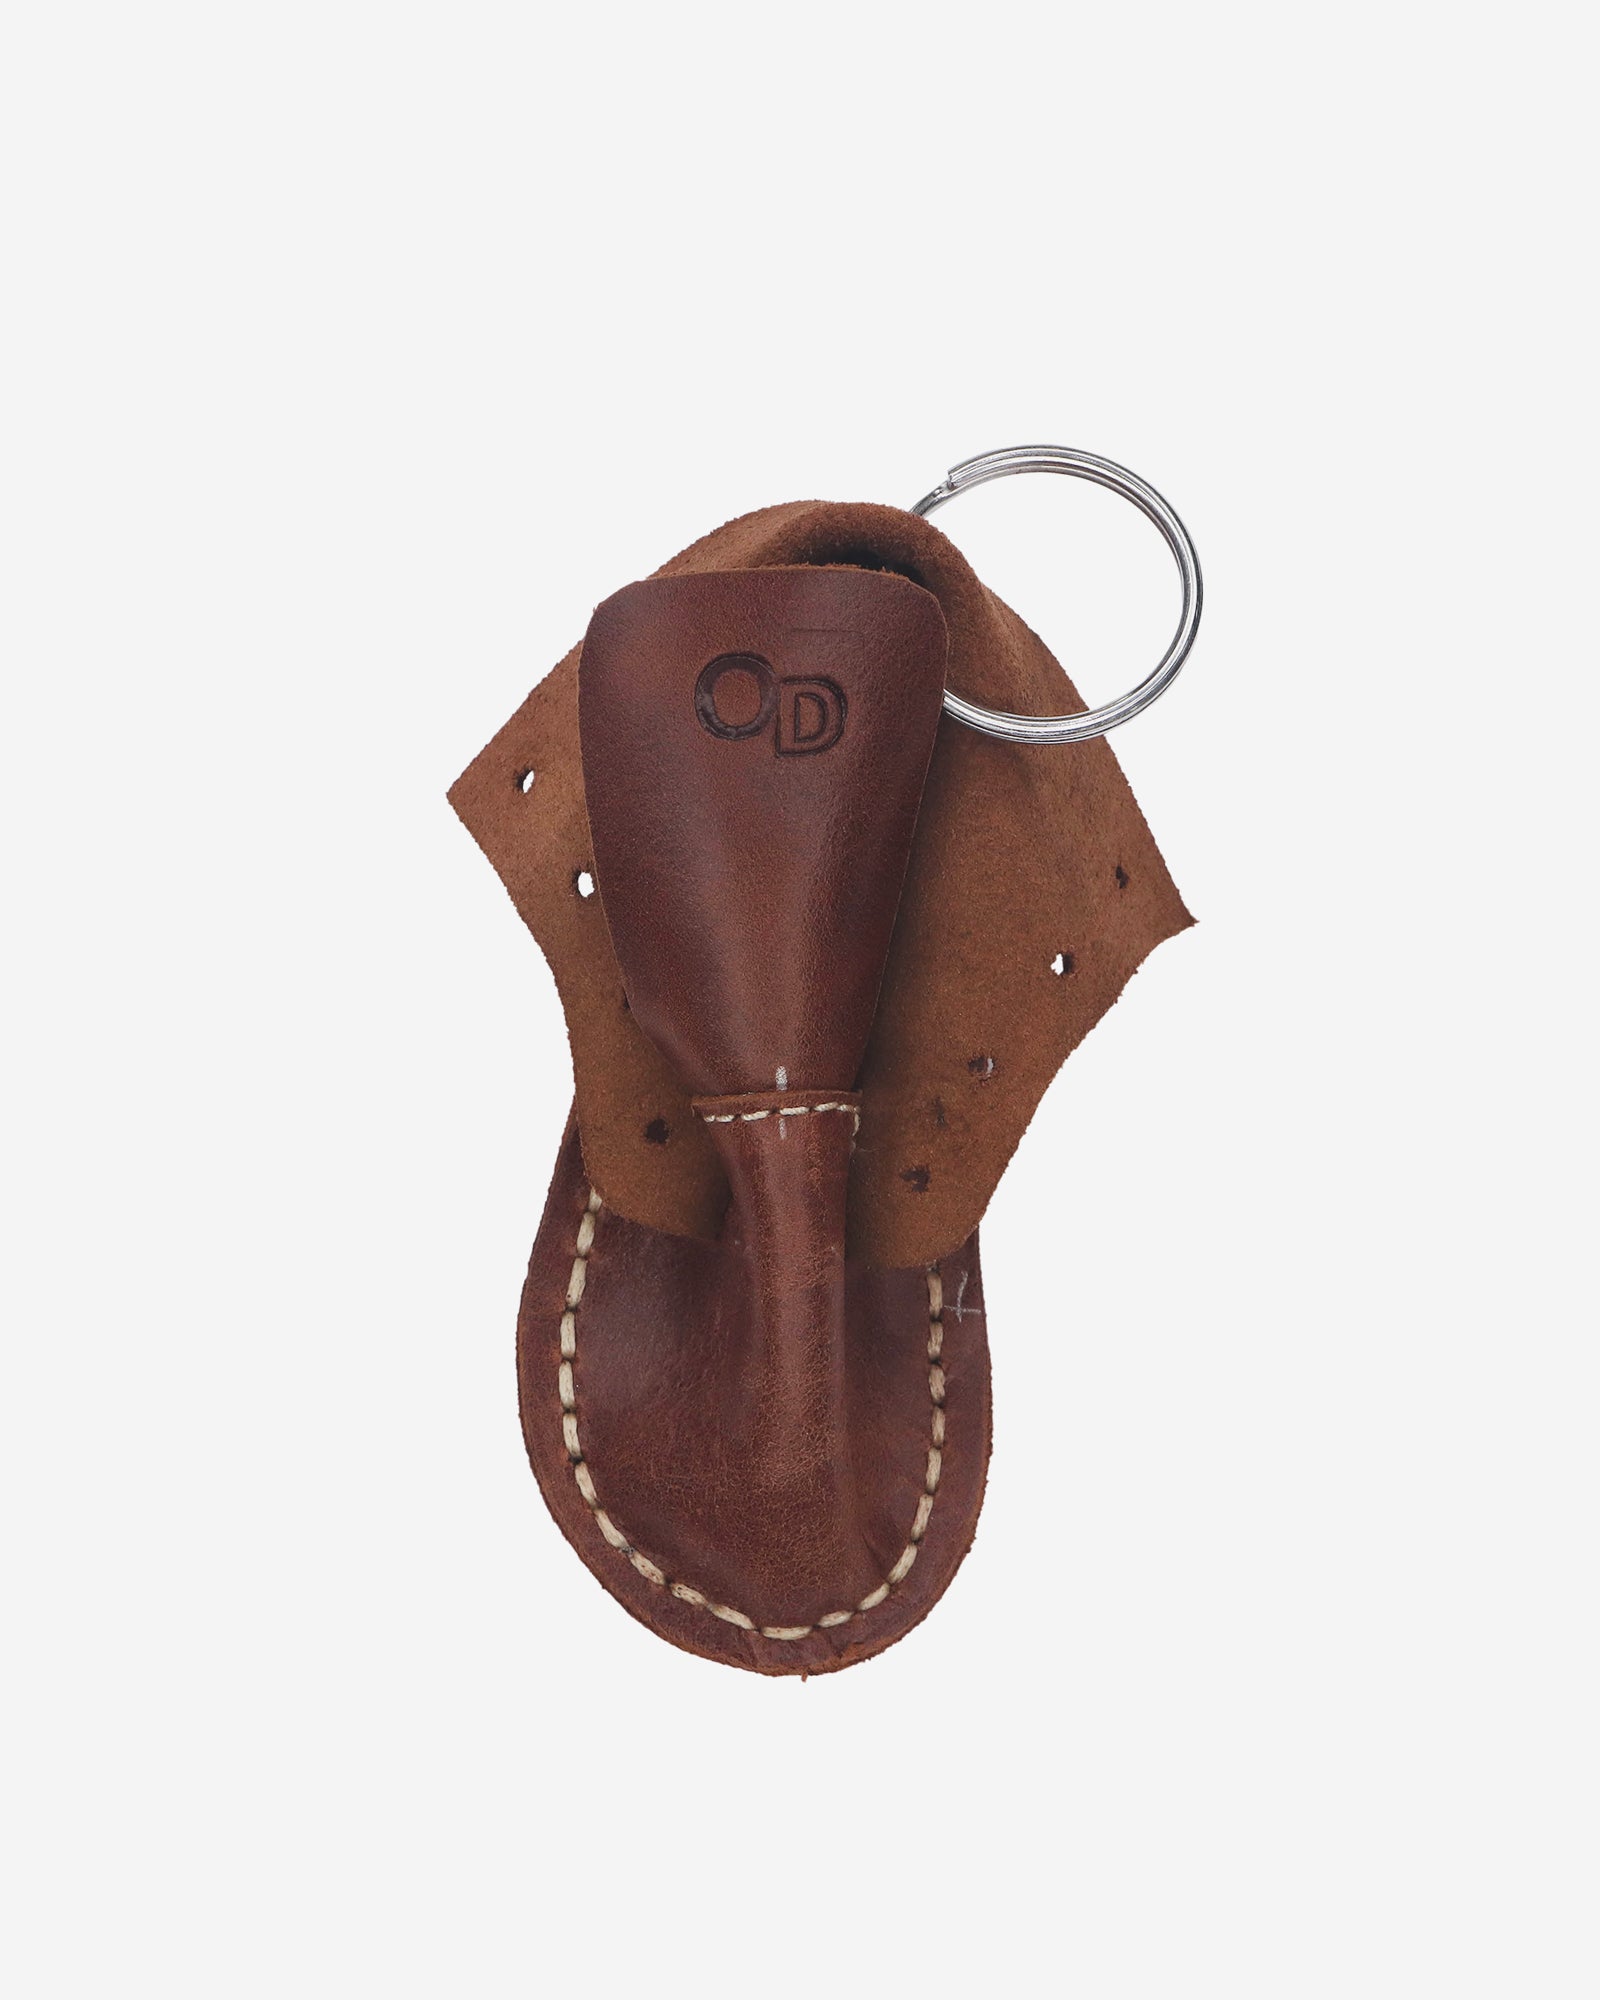 Cacao Leather Boot Key Ring